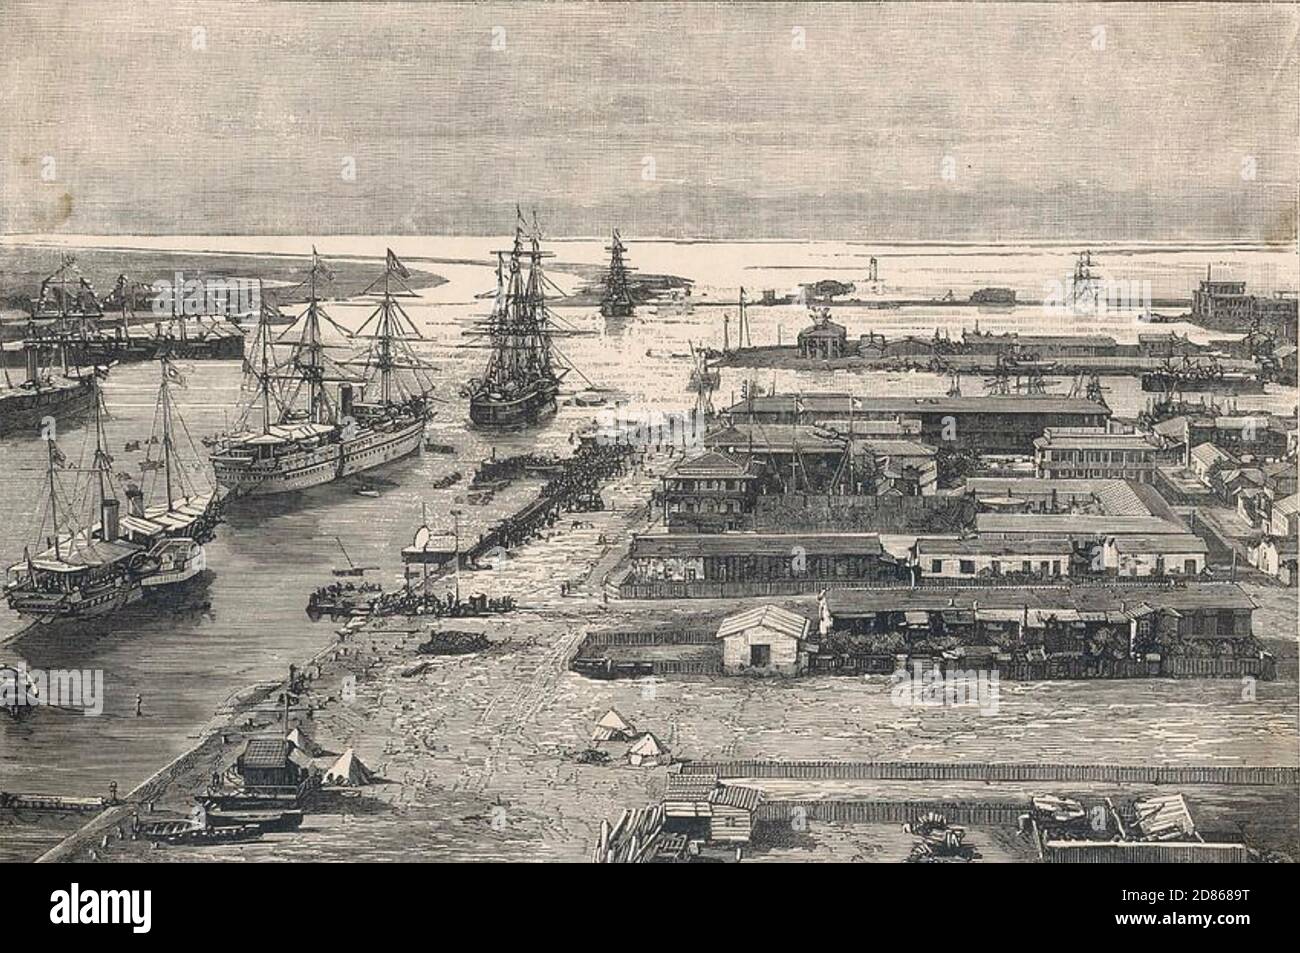 PORT SAID at the north entrance to the Suez Canal, about 1865. Stock Photo